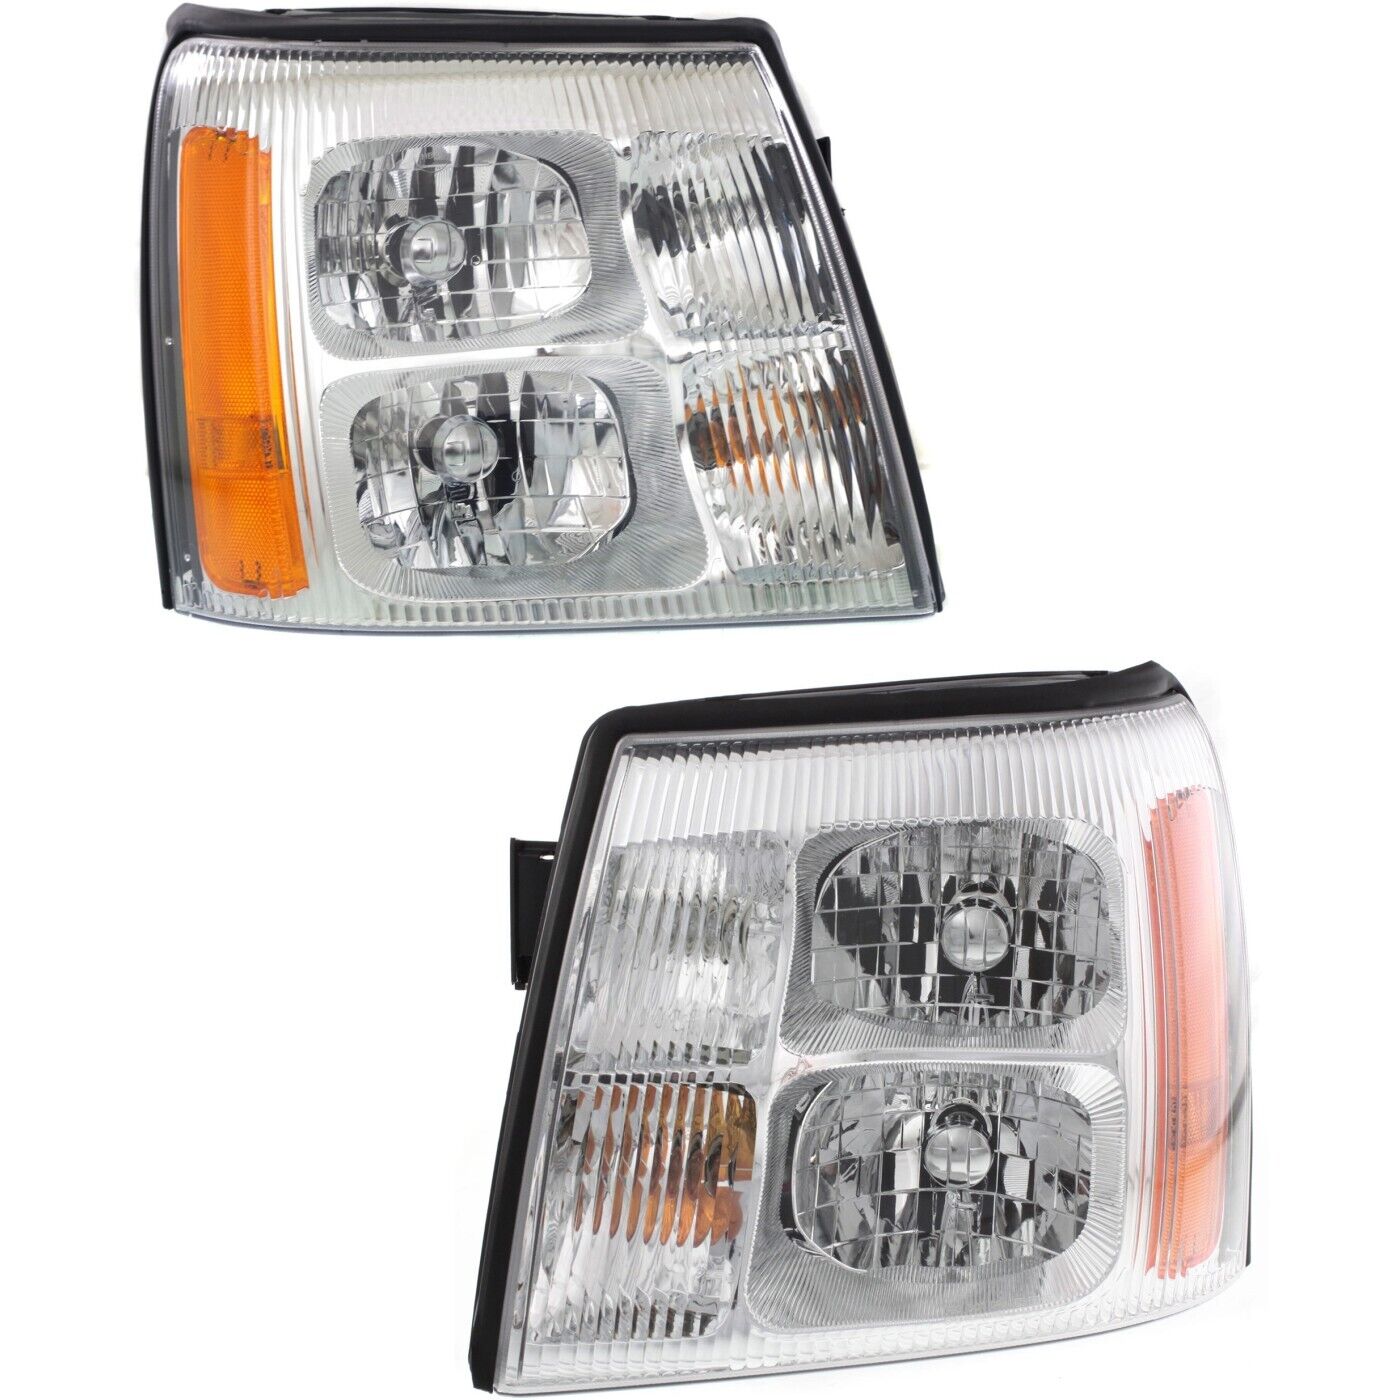 Headlight Set For 2002 Cadillac Escalade Left and Right With Bulb 2Pc